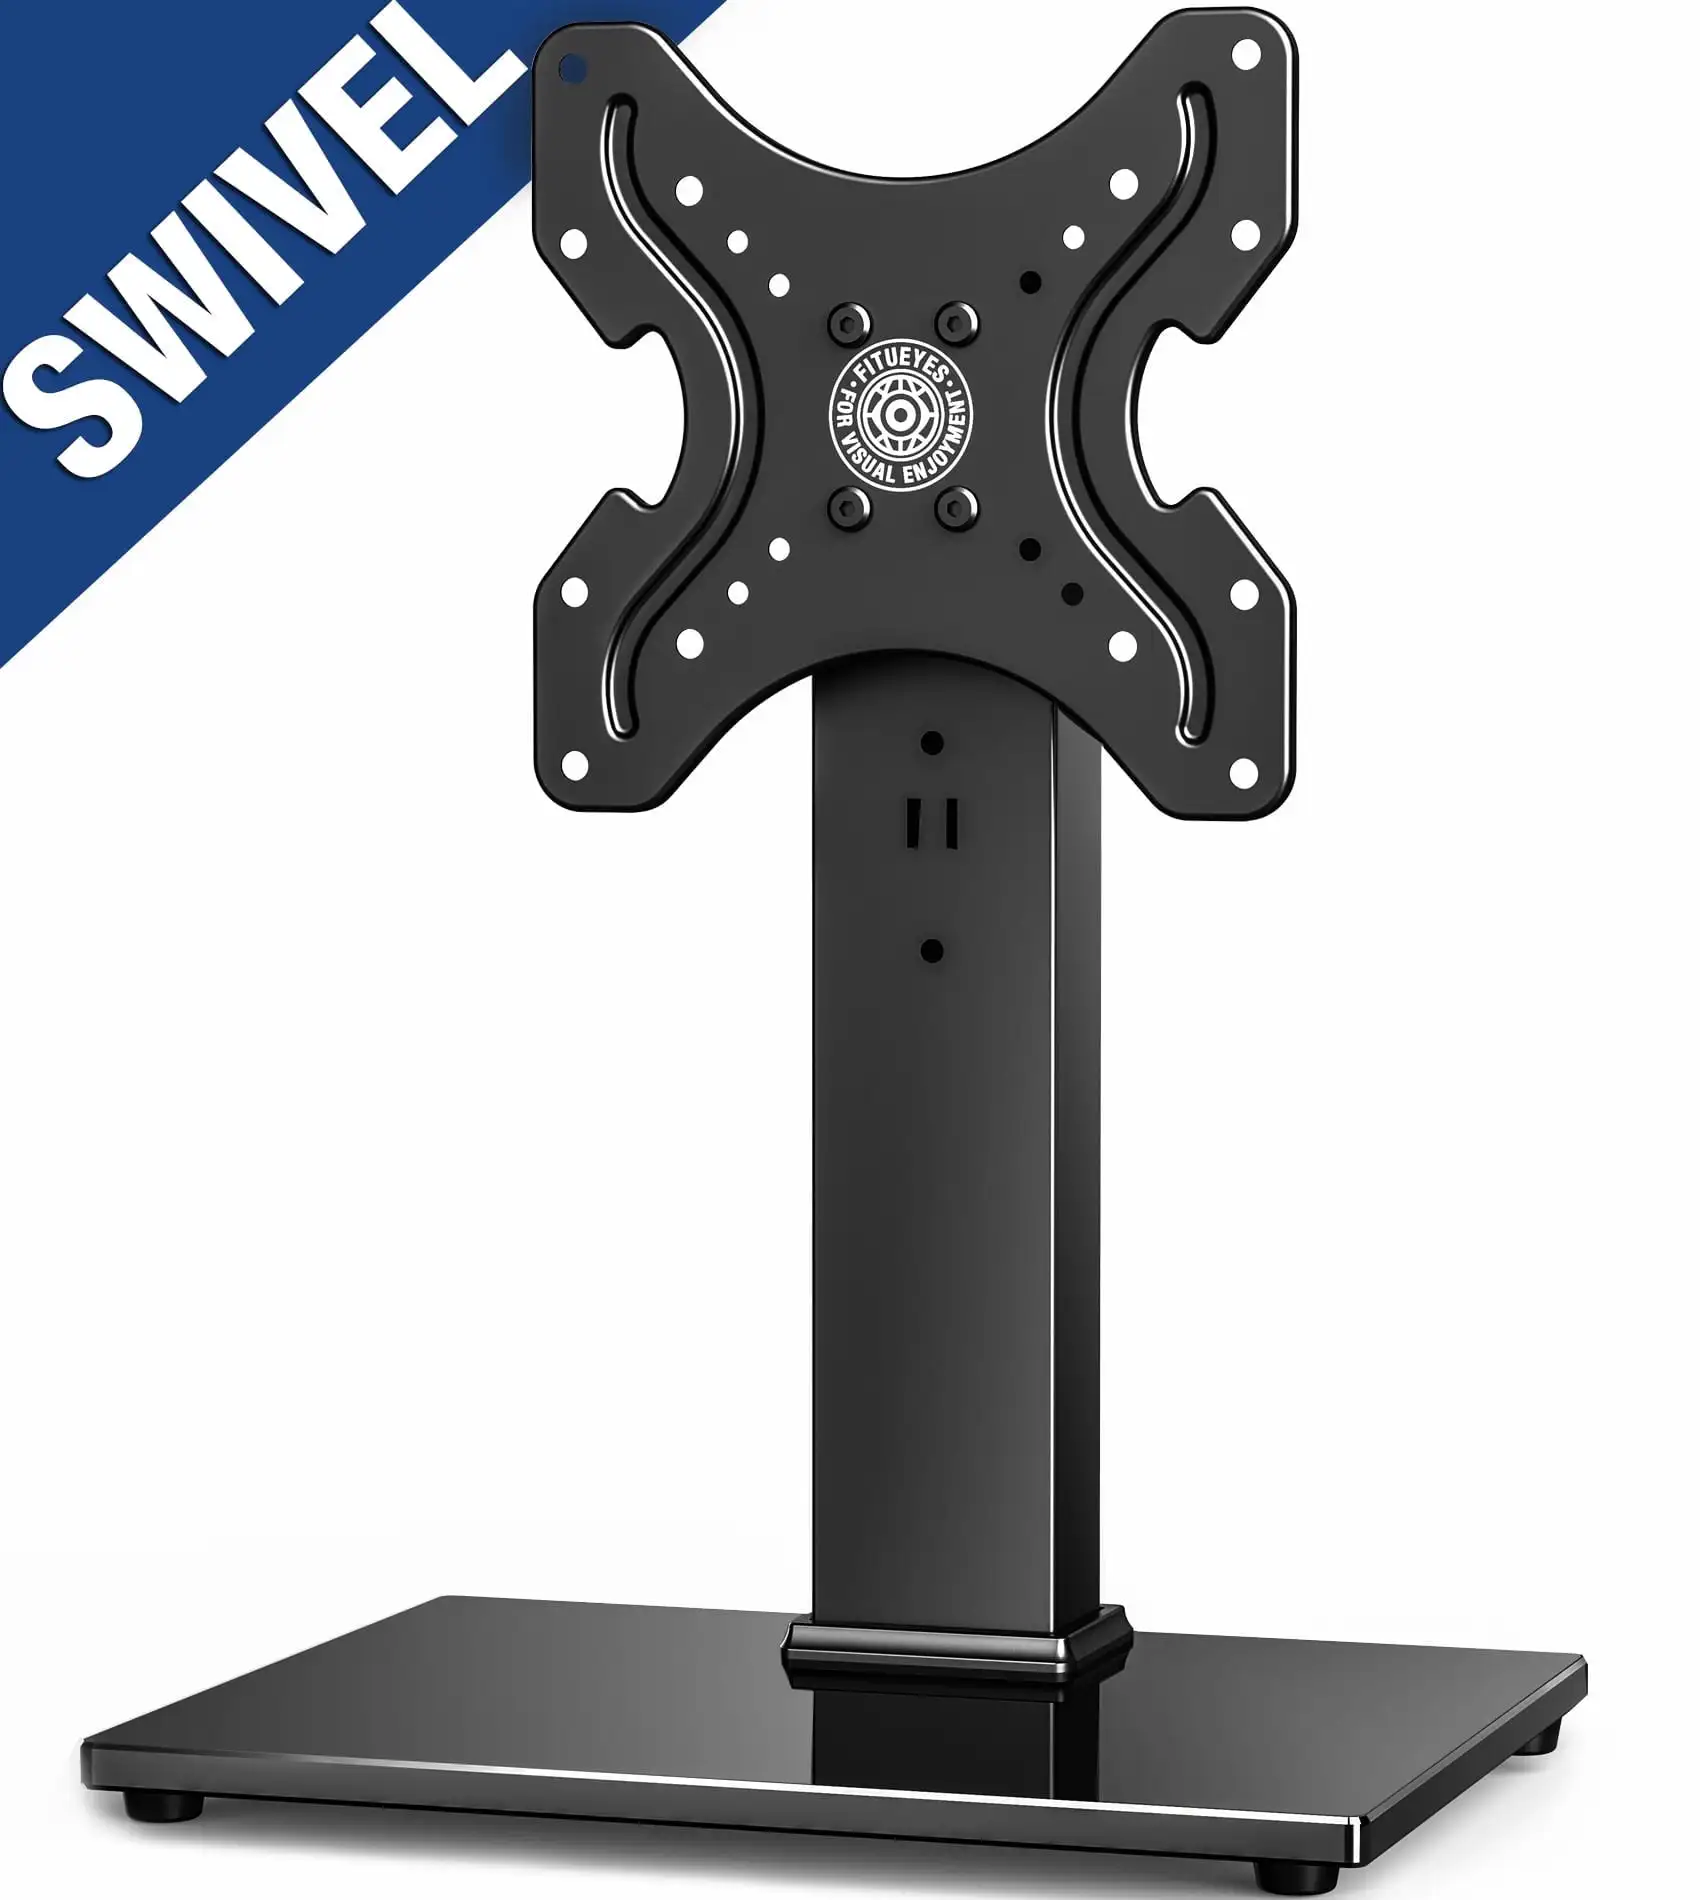 

FITUEYES Universal TV Stand Tabletop TV Base with Swivel Mount for 19-39" inch Flat Screen TvsTT104001GB